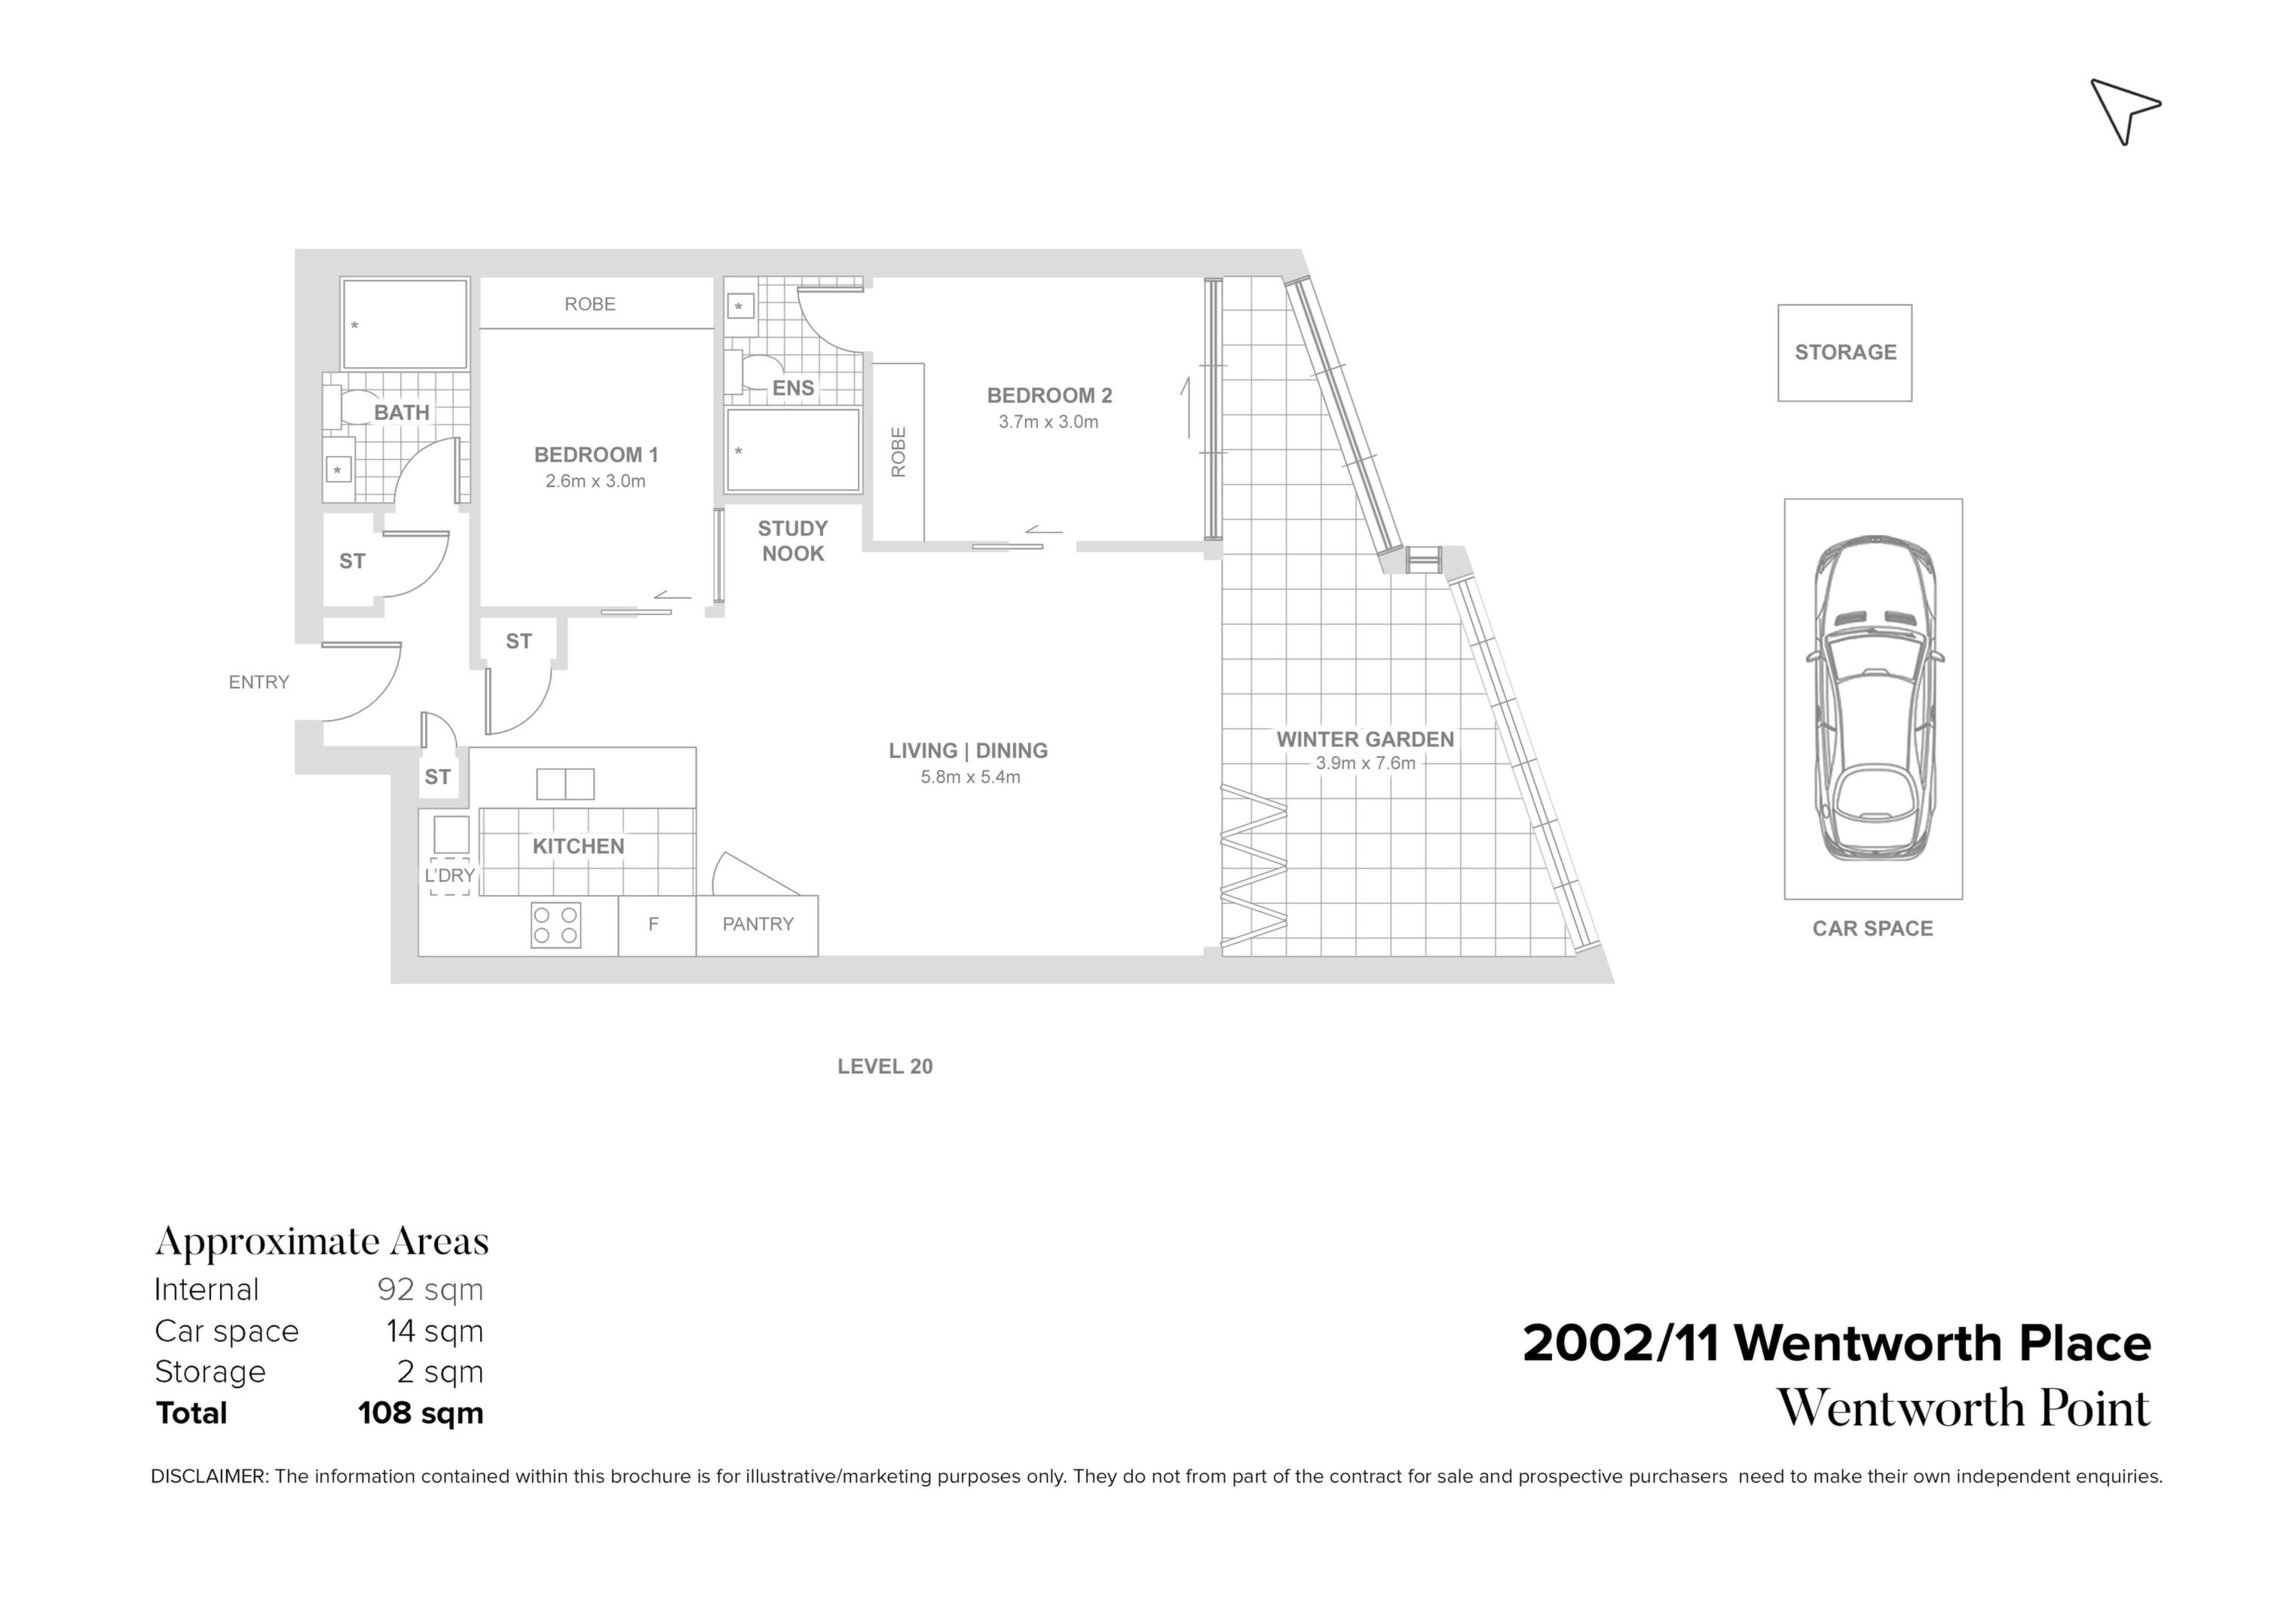 2002/11 Wentworth Place, Wentworth Point Sold by Chidiac Realty - floorplan